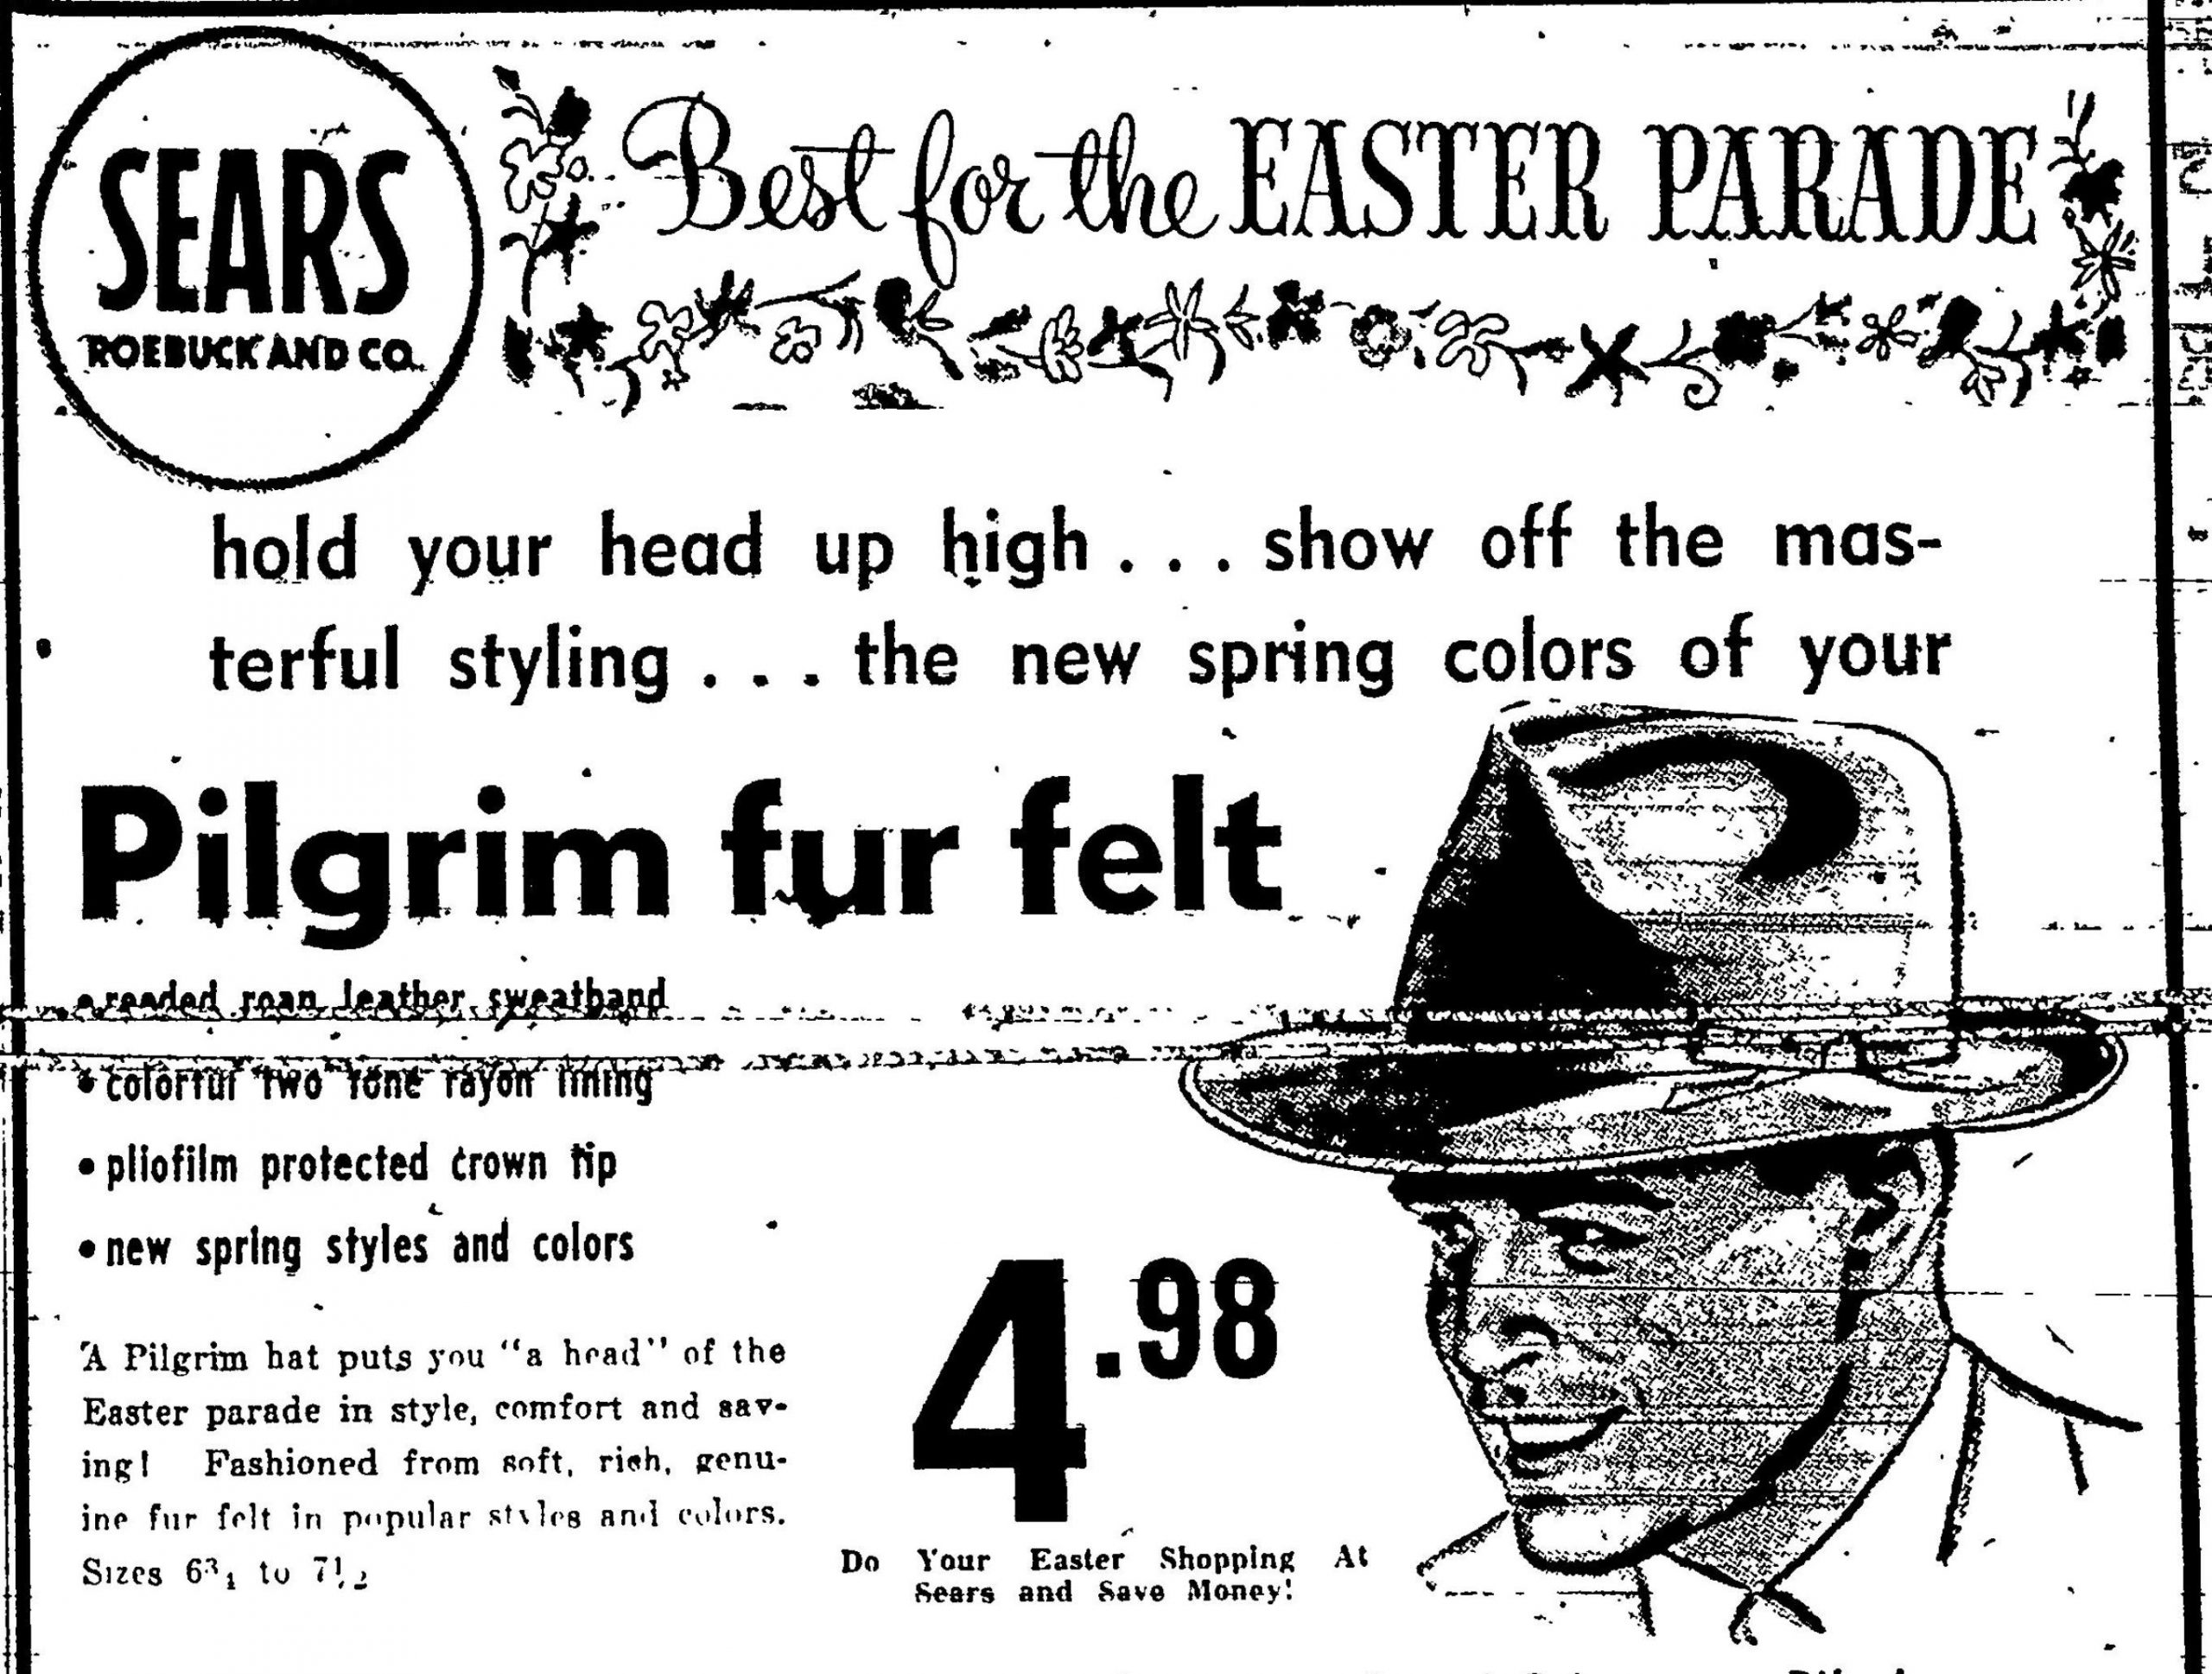 Sears Roebuck and Co. - Wheeling Intelligencer, March 23, 1951